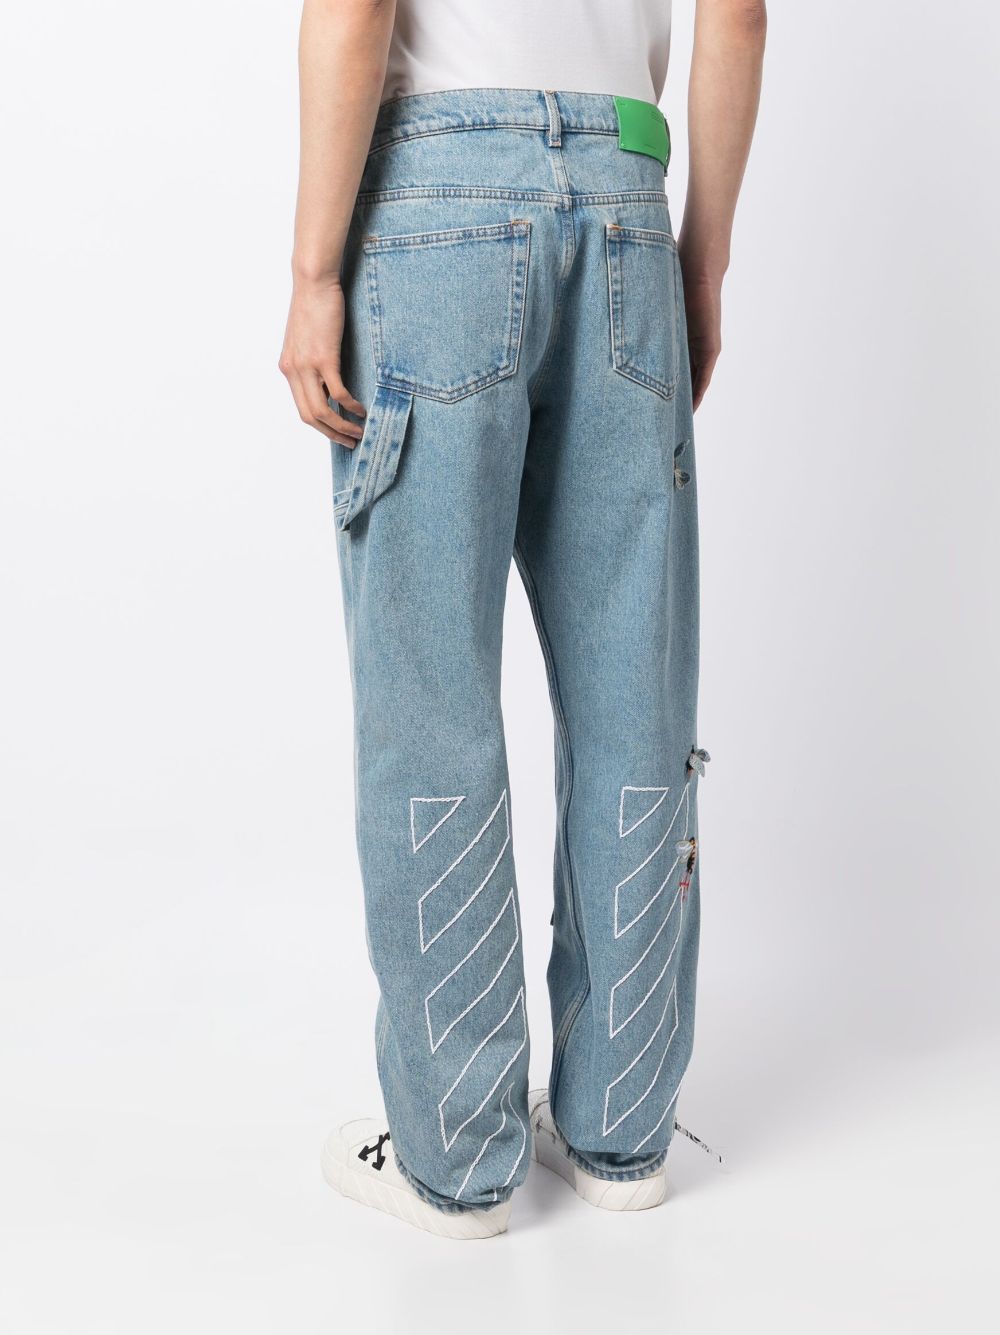 Off-White Carpenter bee-embroidered Denim Trousers - Farfetch